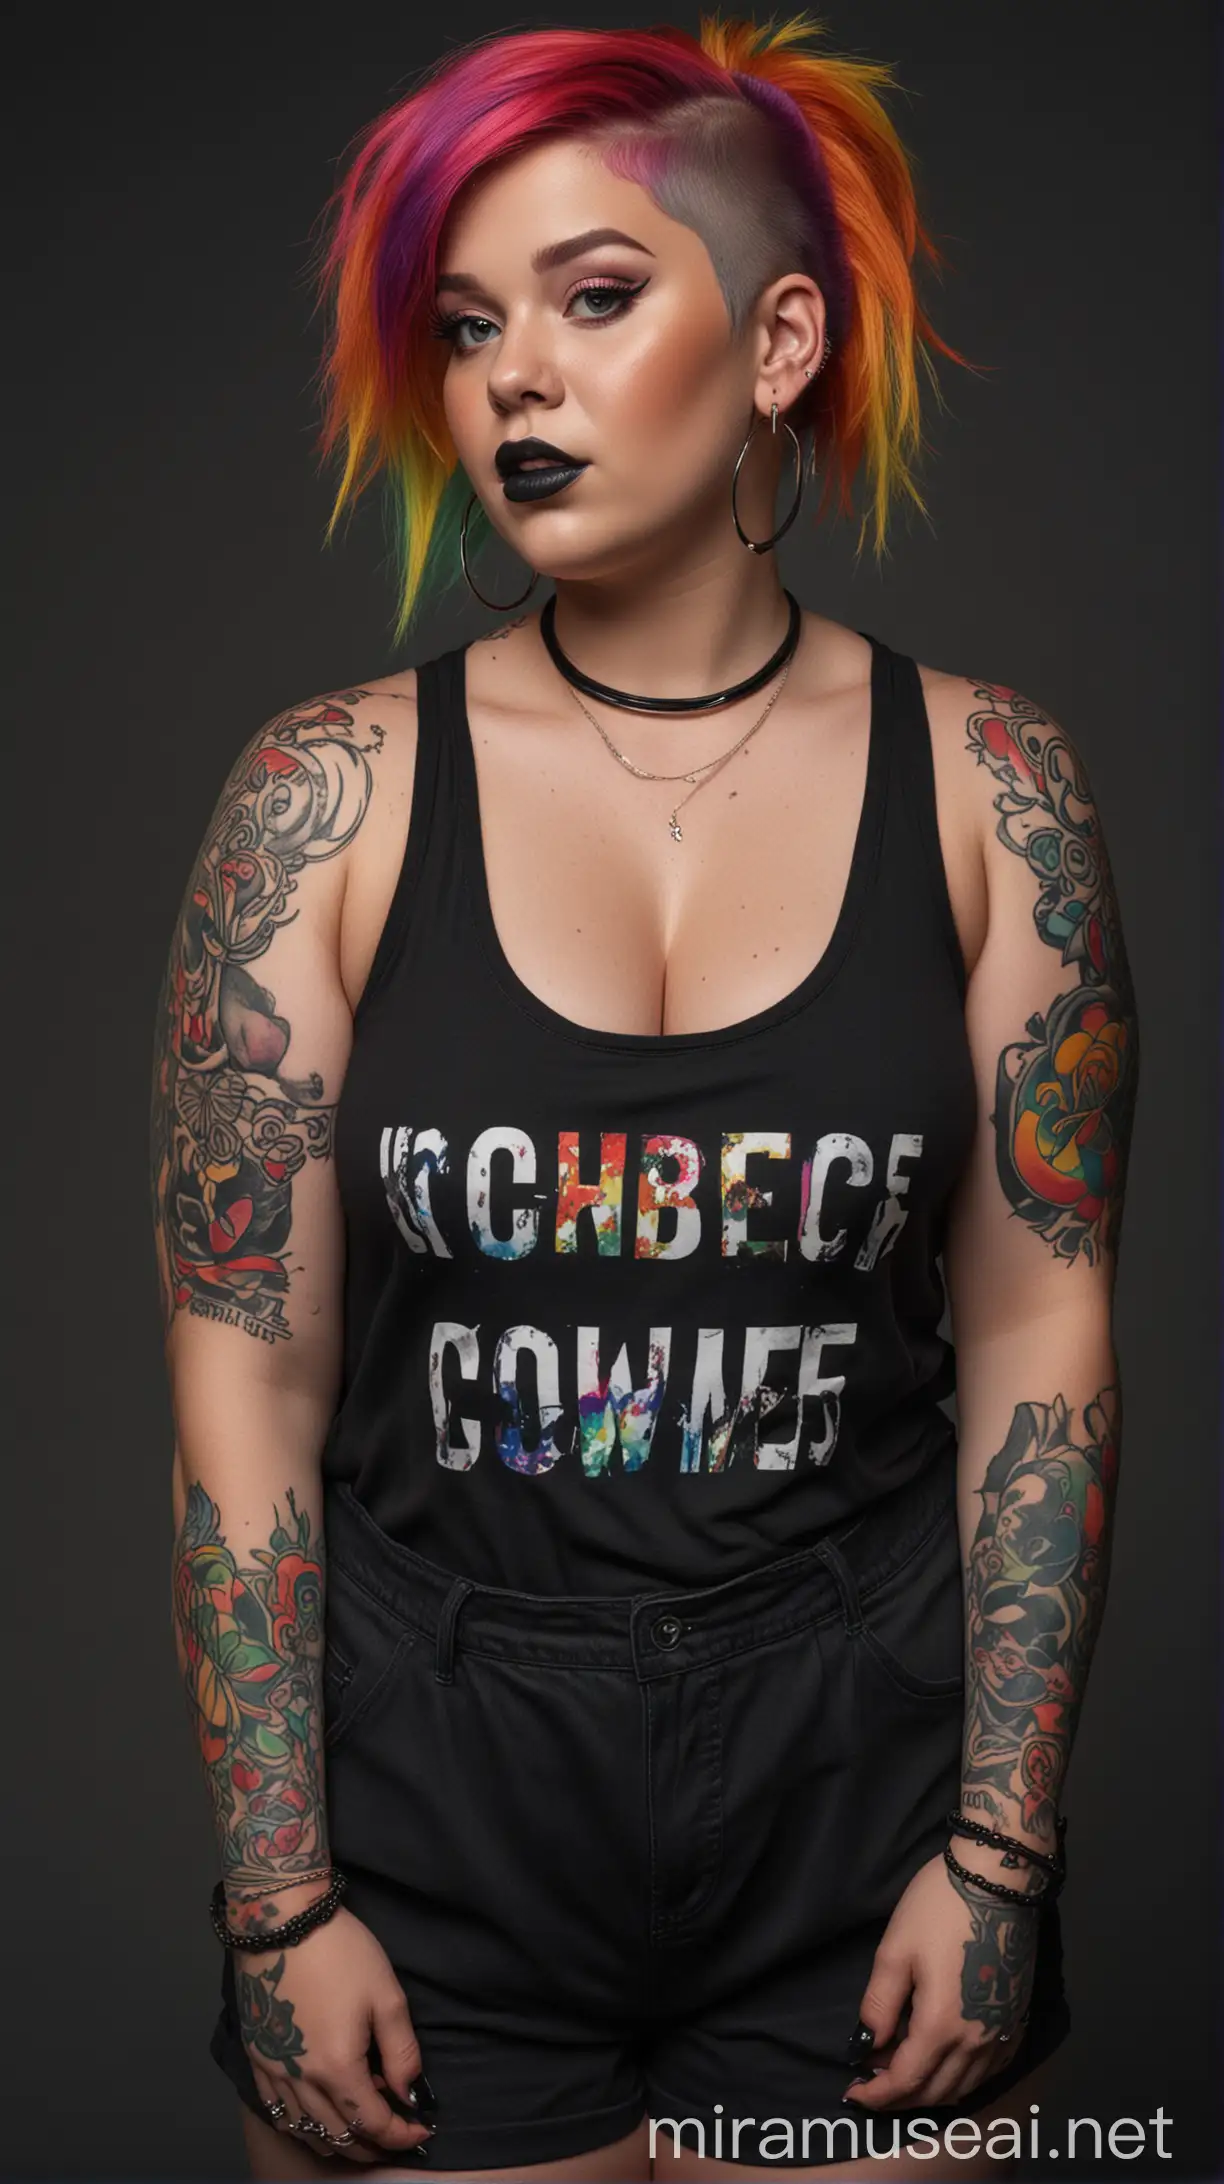 Intense Obese Woman with Rainbow Hair and Tattoos in Black Tank Top